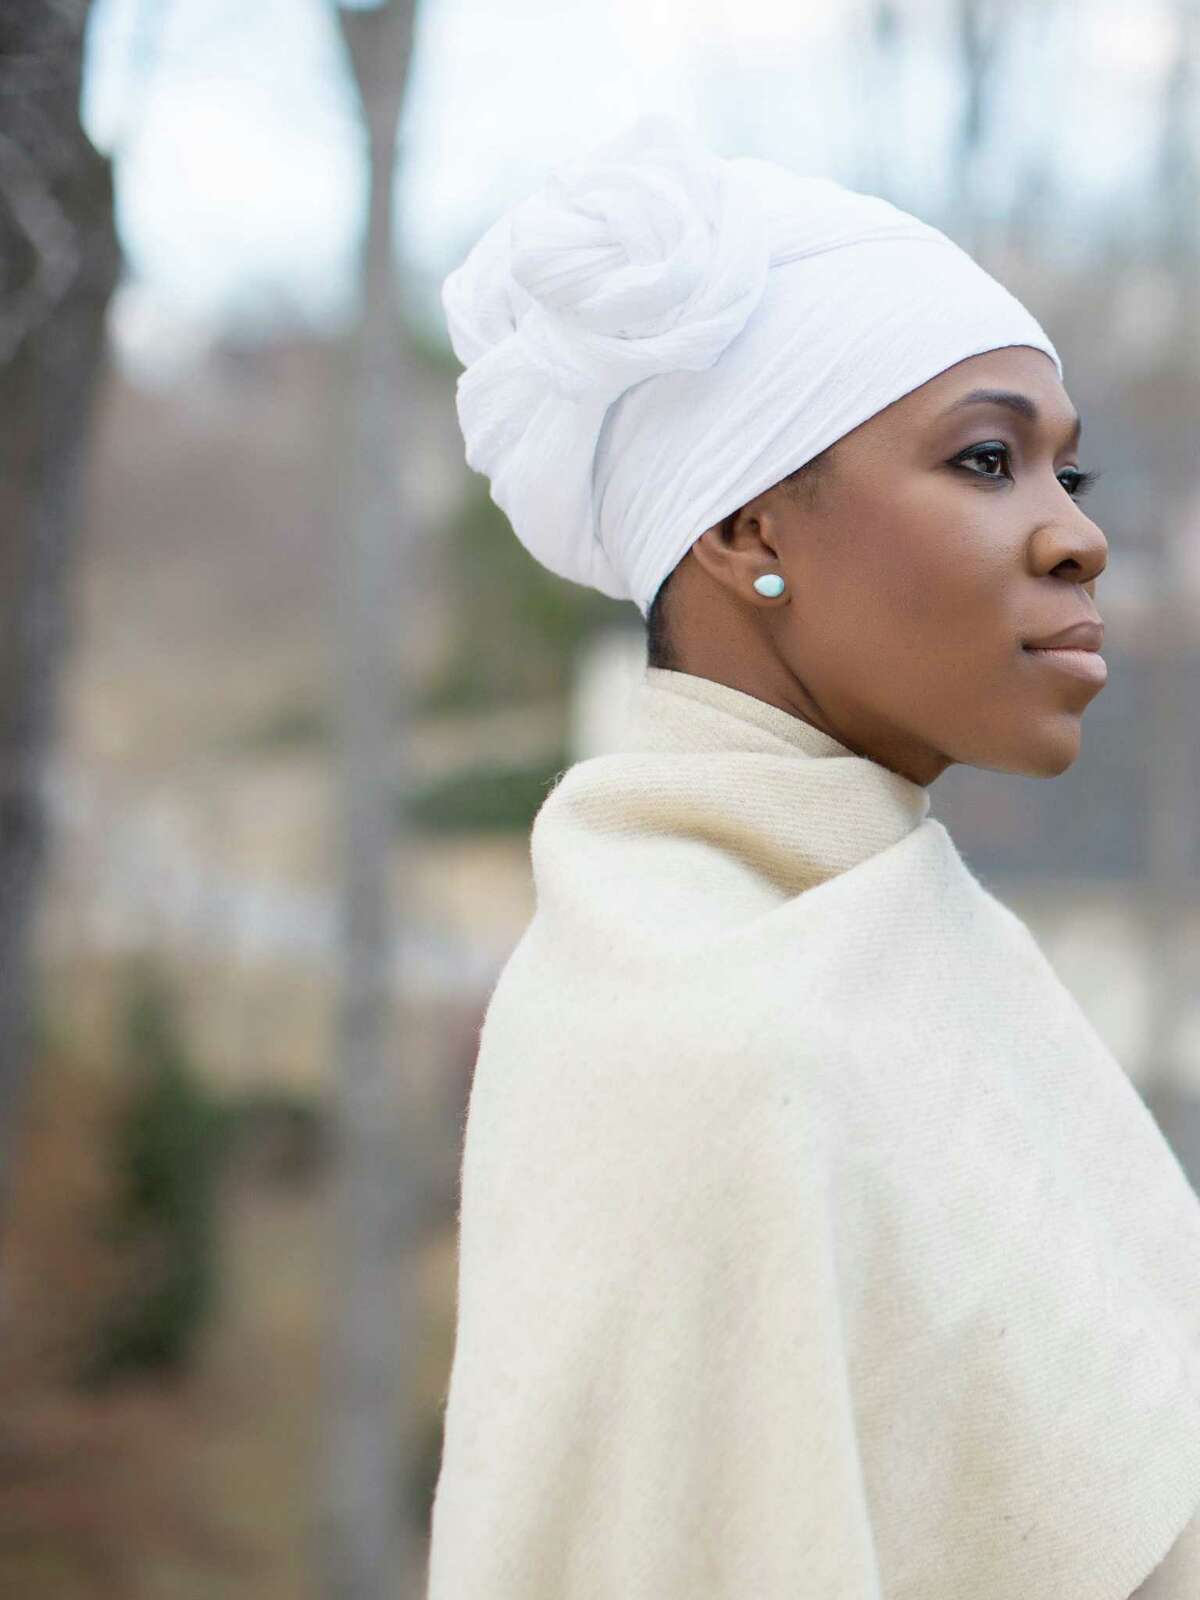 India.Arie, a former U.S. ambassador for UNICEF and supporter of the Half the Sky Movement to eradicate the oppression of women worldwide, will headline the Grace Farms Foundation's second anniversary celebration benefiting a campaign to help eradicate modern day slavery on Oct. 14, 2017 in New Canaan, Conn.